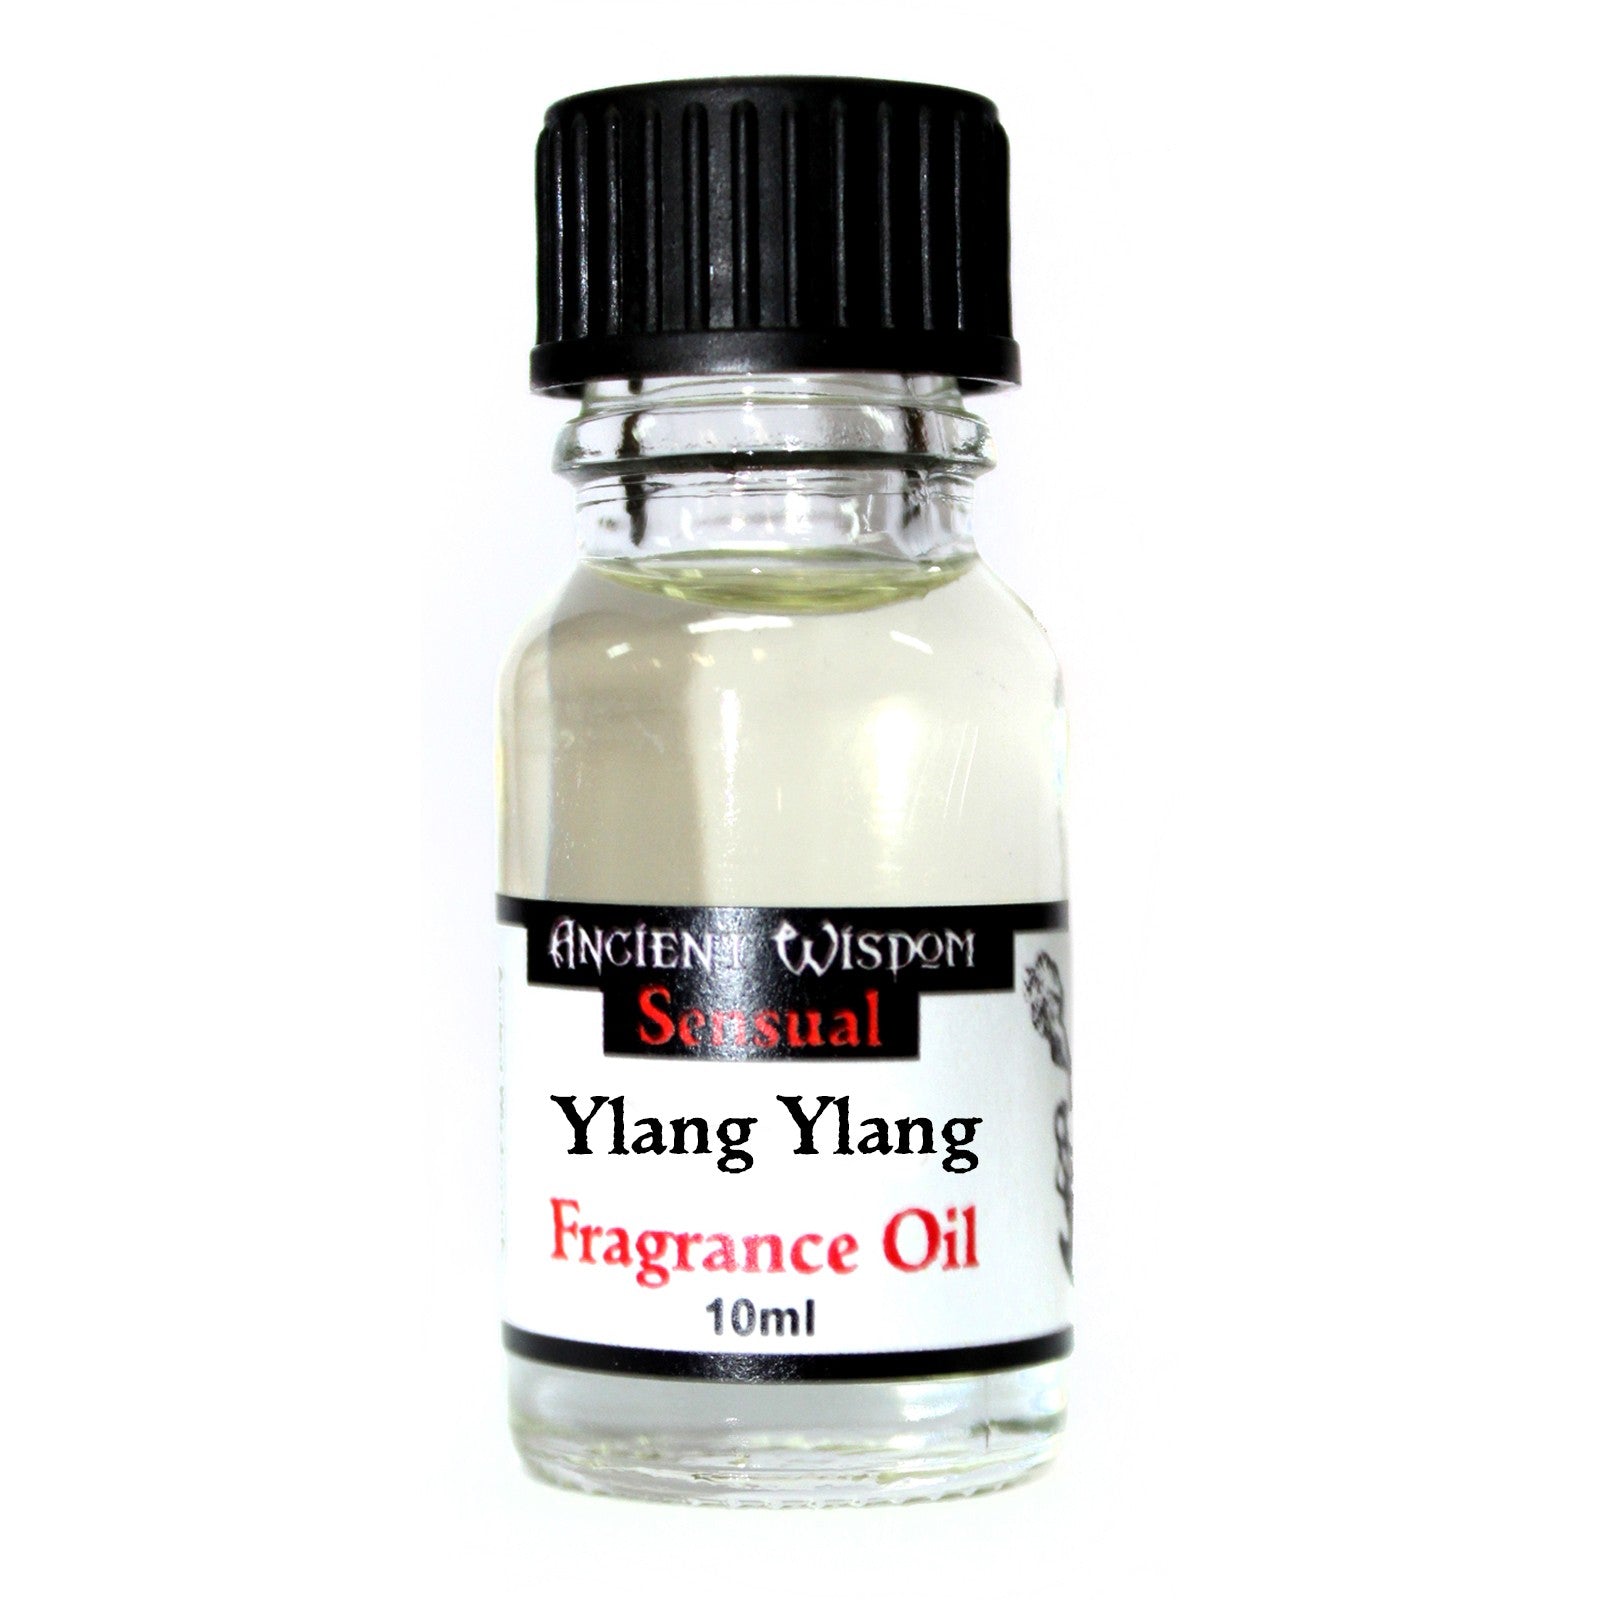 View 10ml YlangYlang Fragrance Oil information